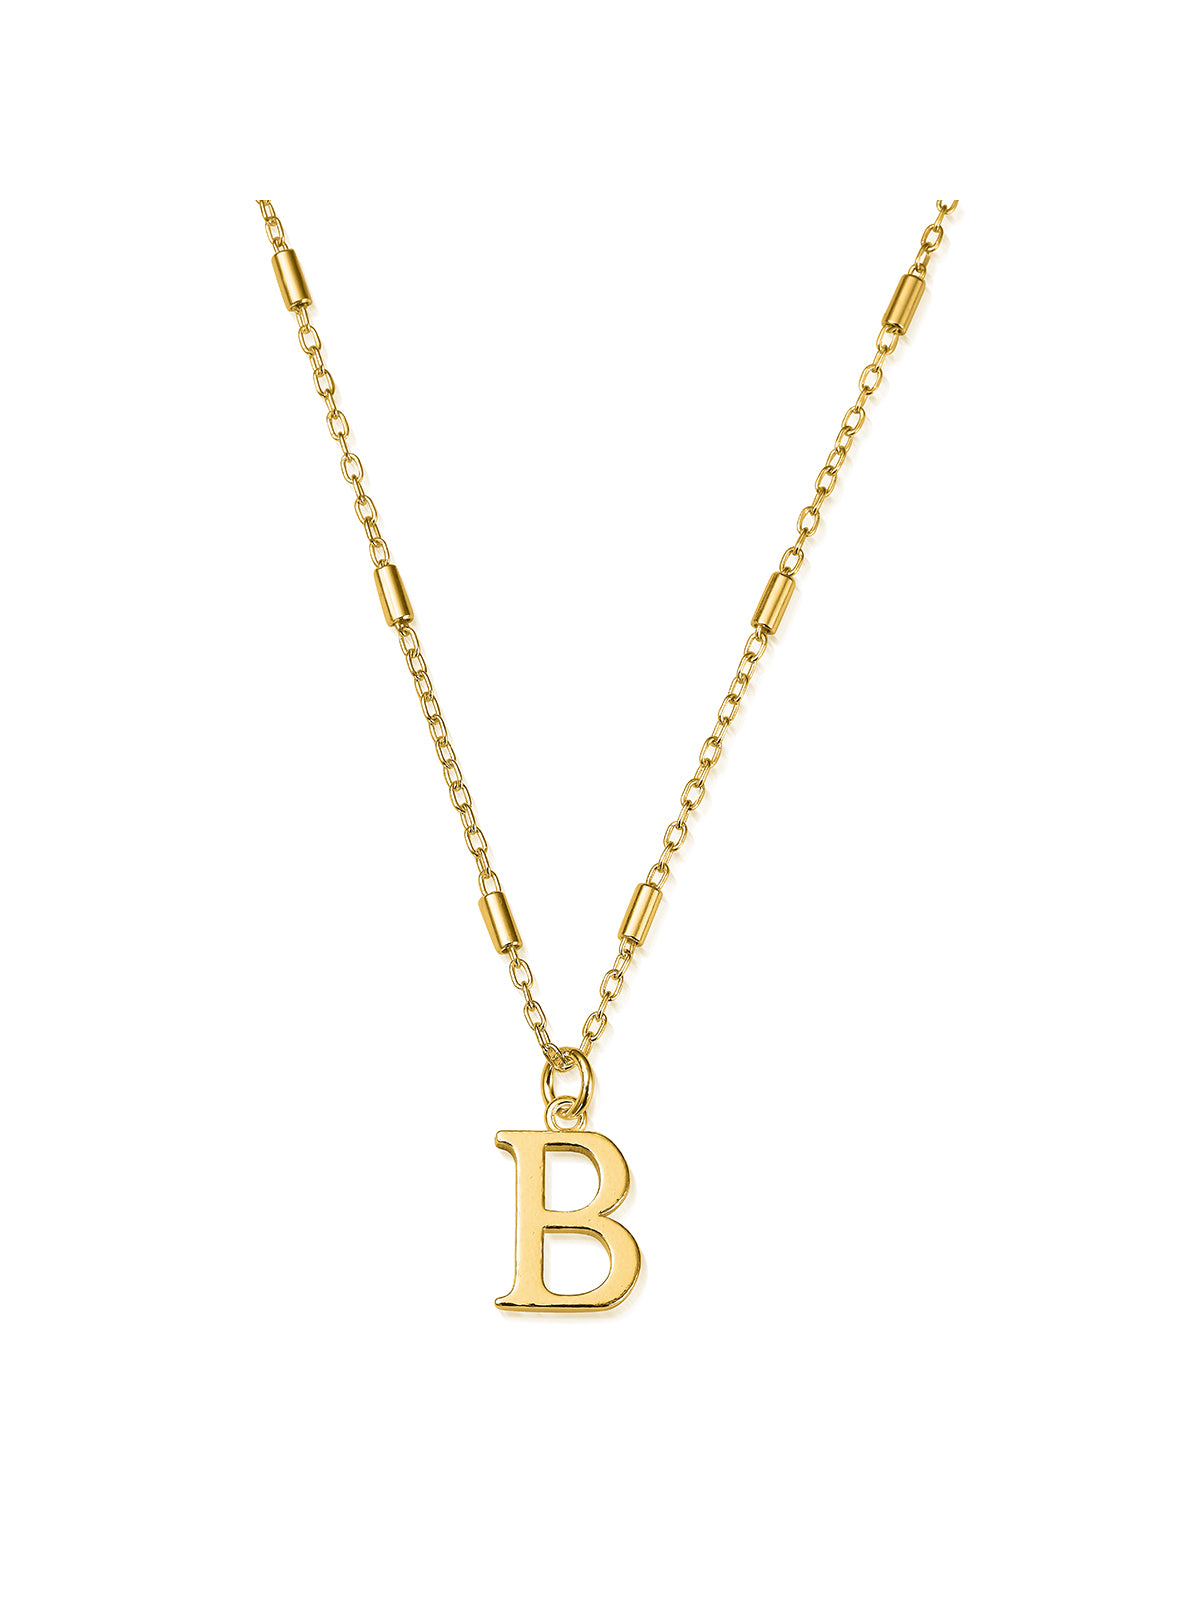 ChloBo Iconic Initial B Necklace in Gold Plating GNCC4041B